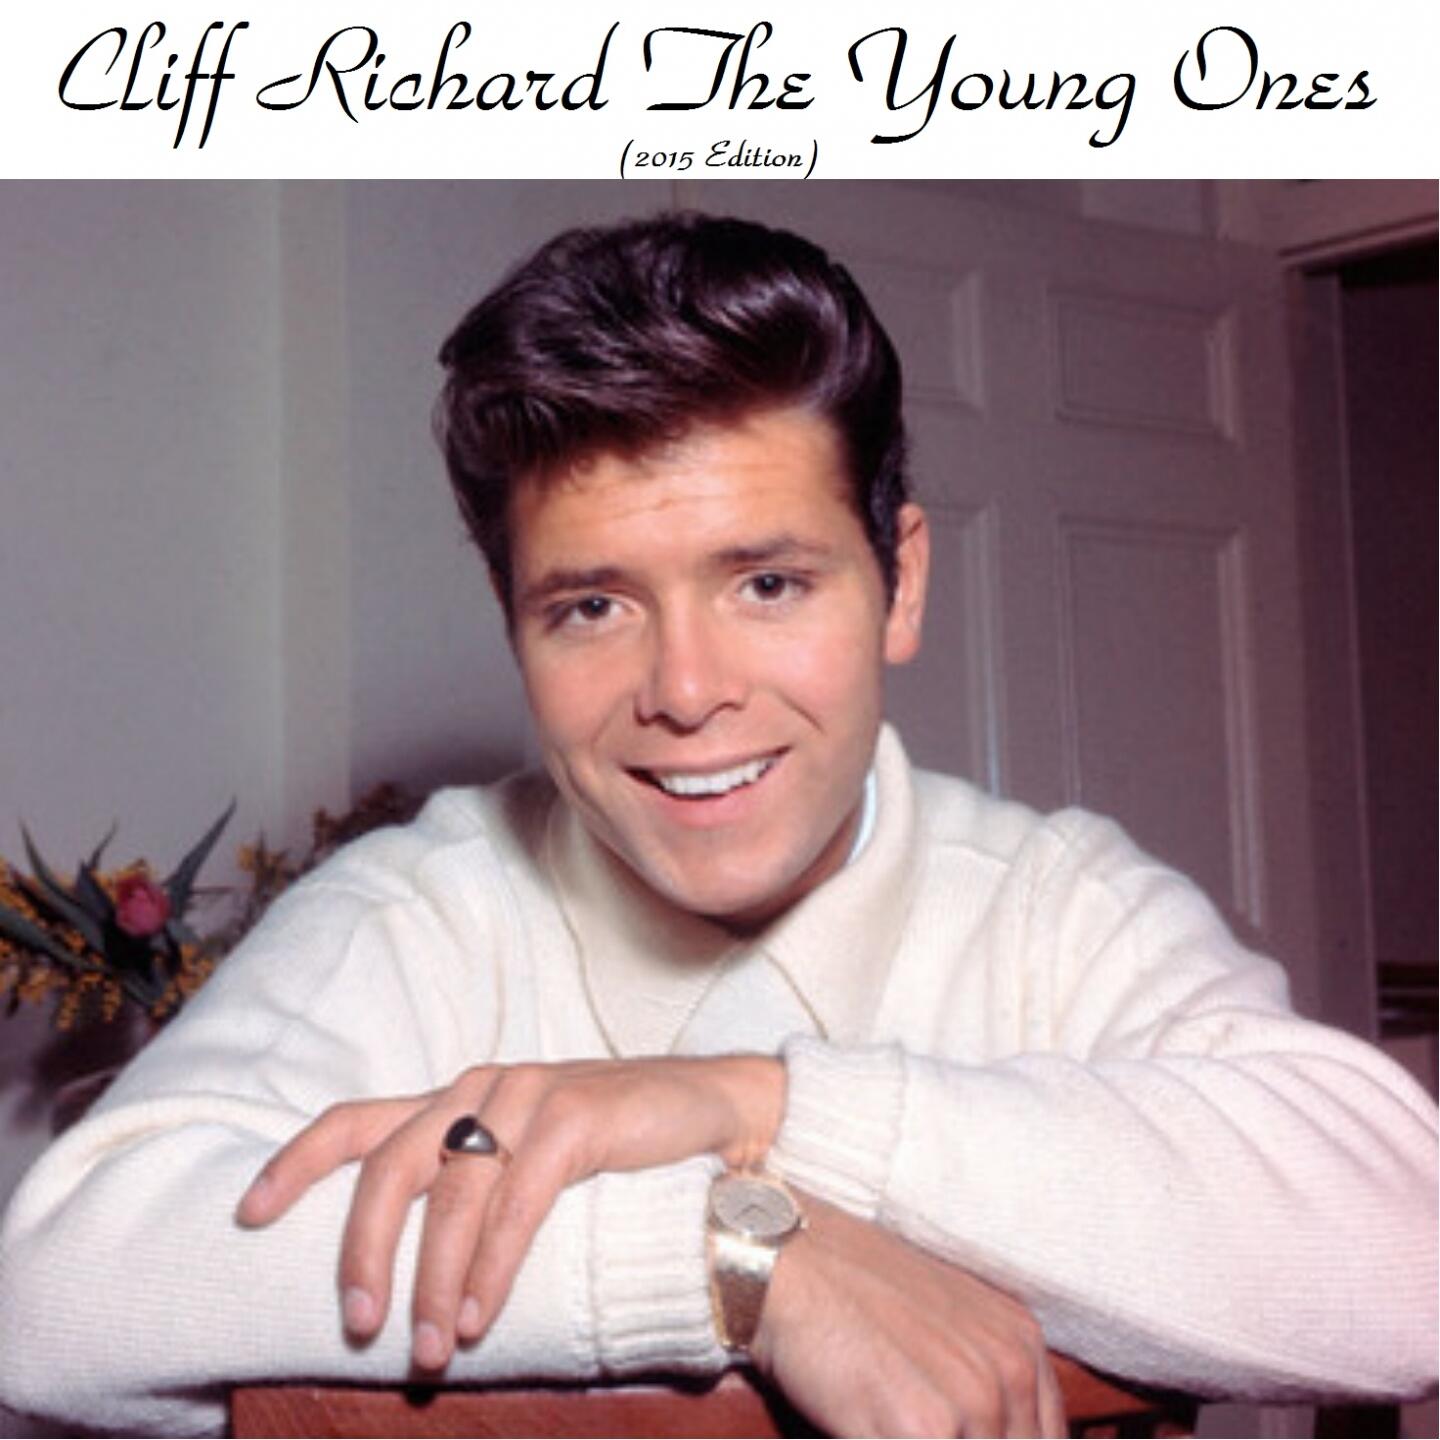 Cliff Richard - The Young Ones | iHeart